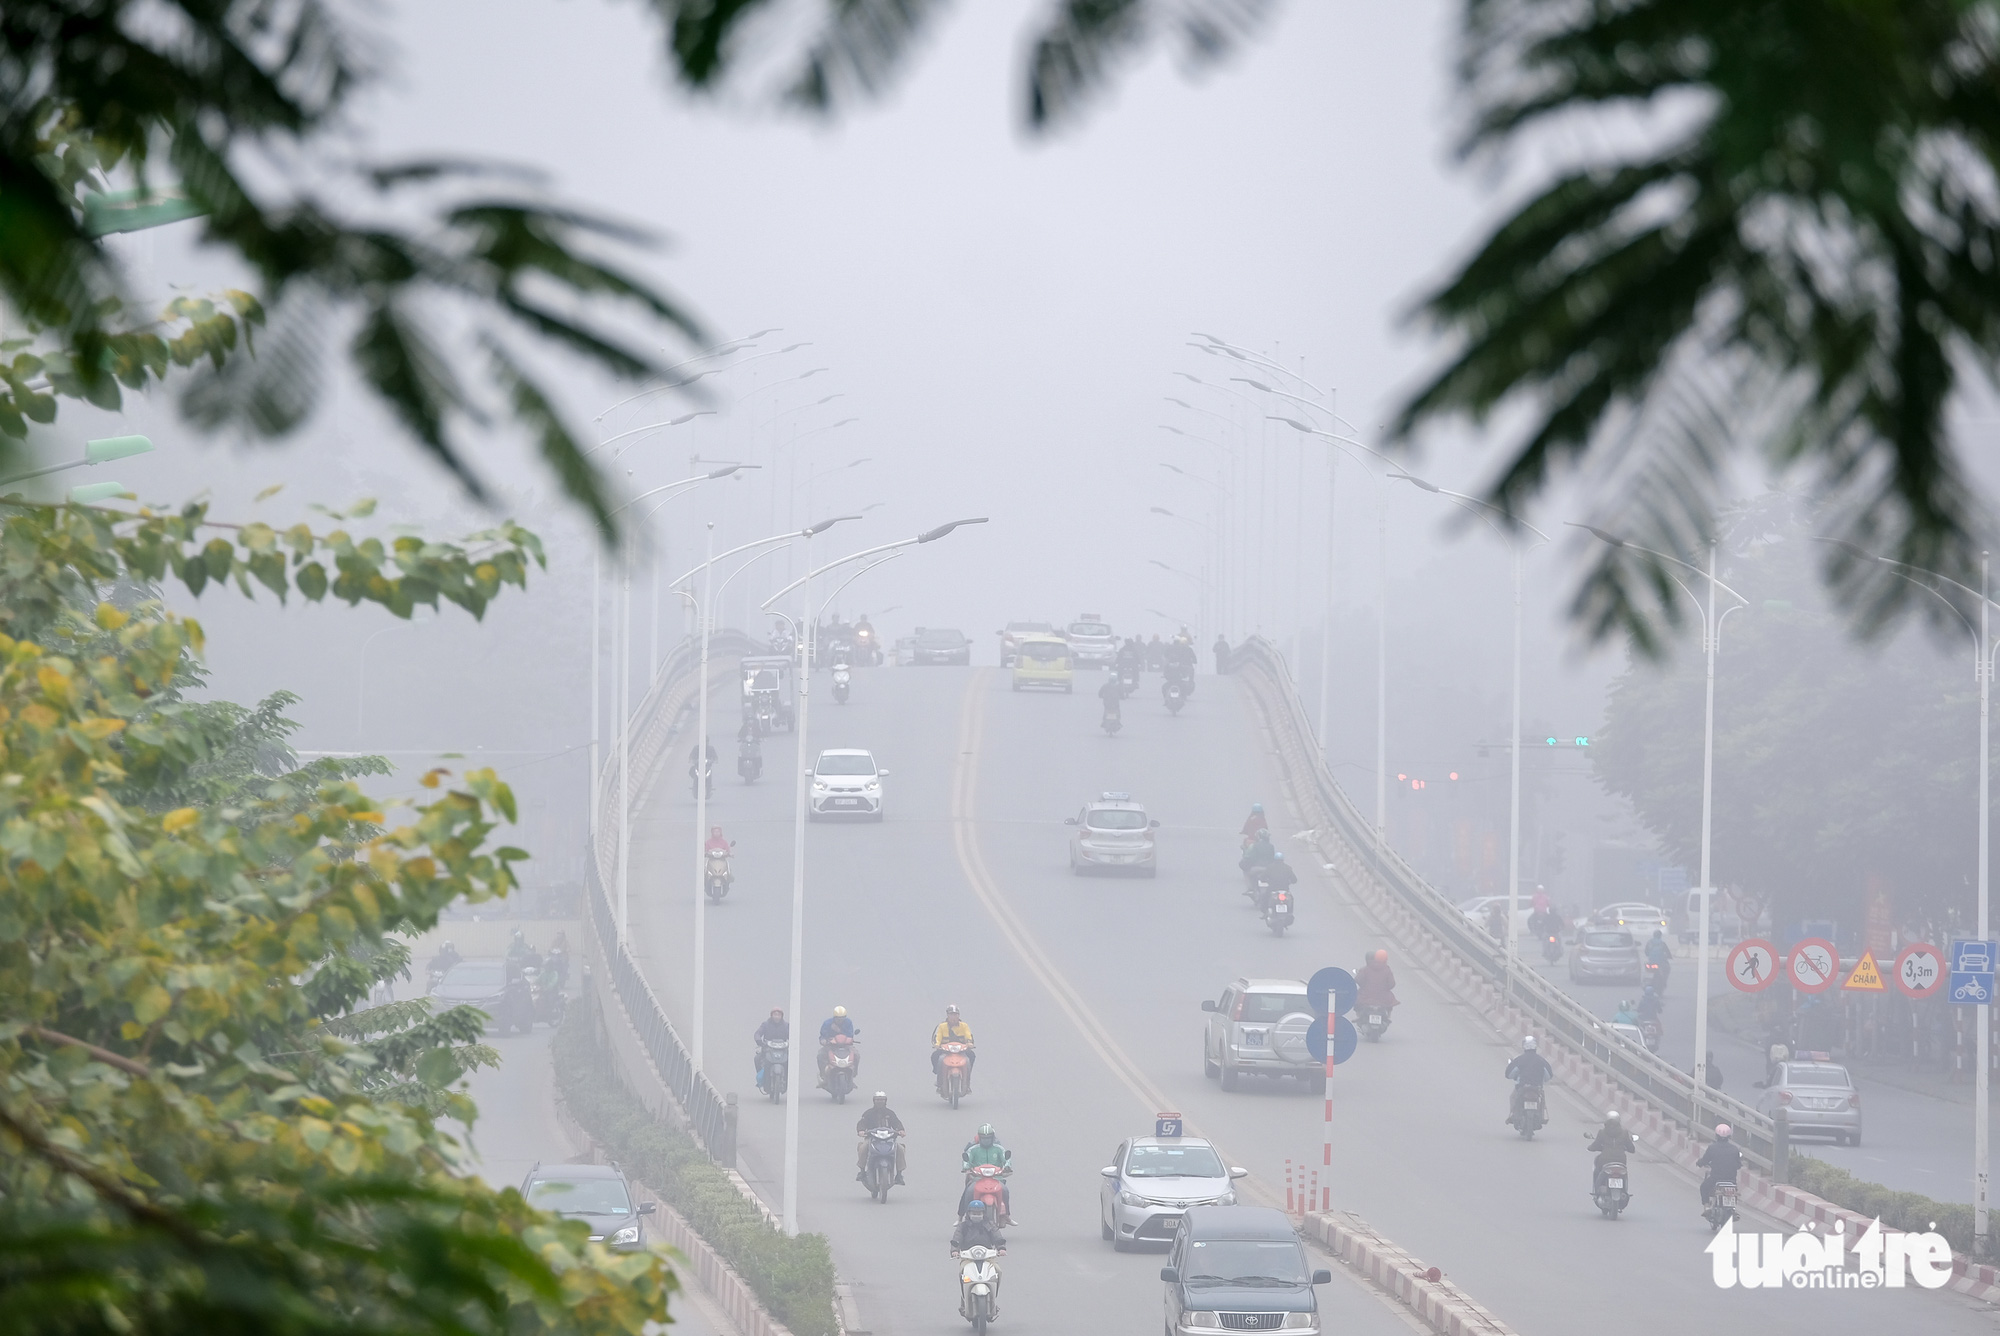 Commuters travel on Nguyen Chi Thanh overpass in Hanoi on the morning of December 24, 2019.